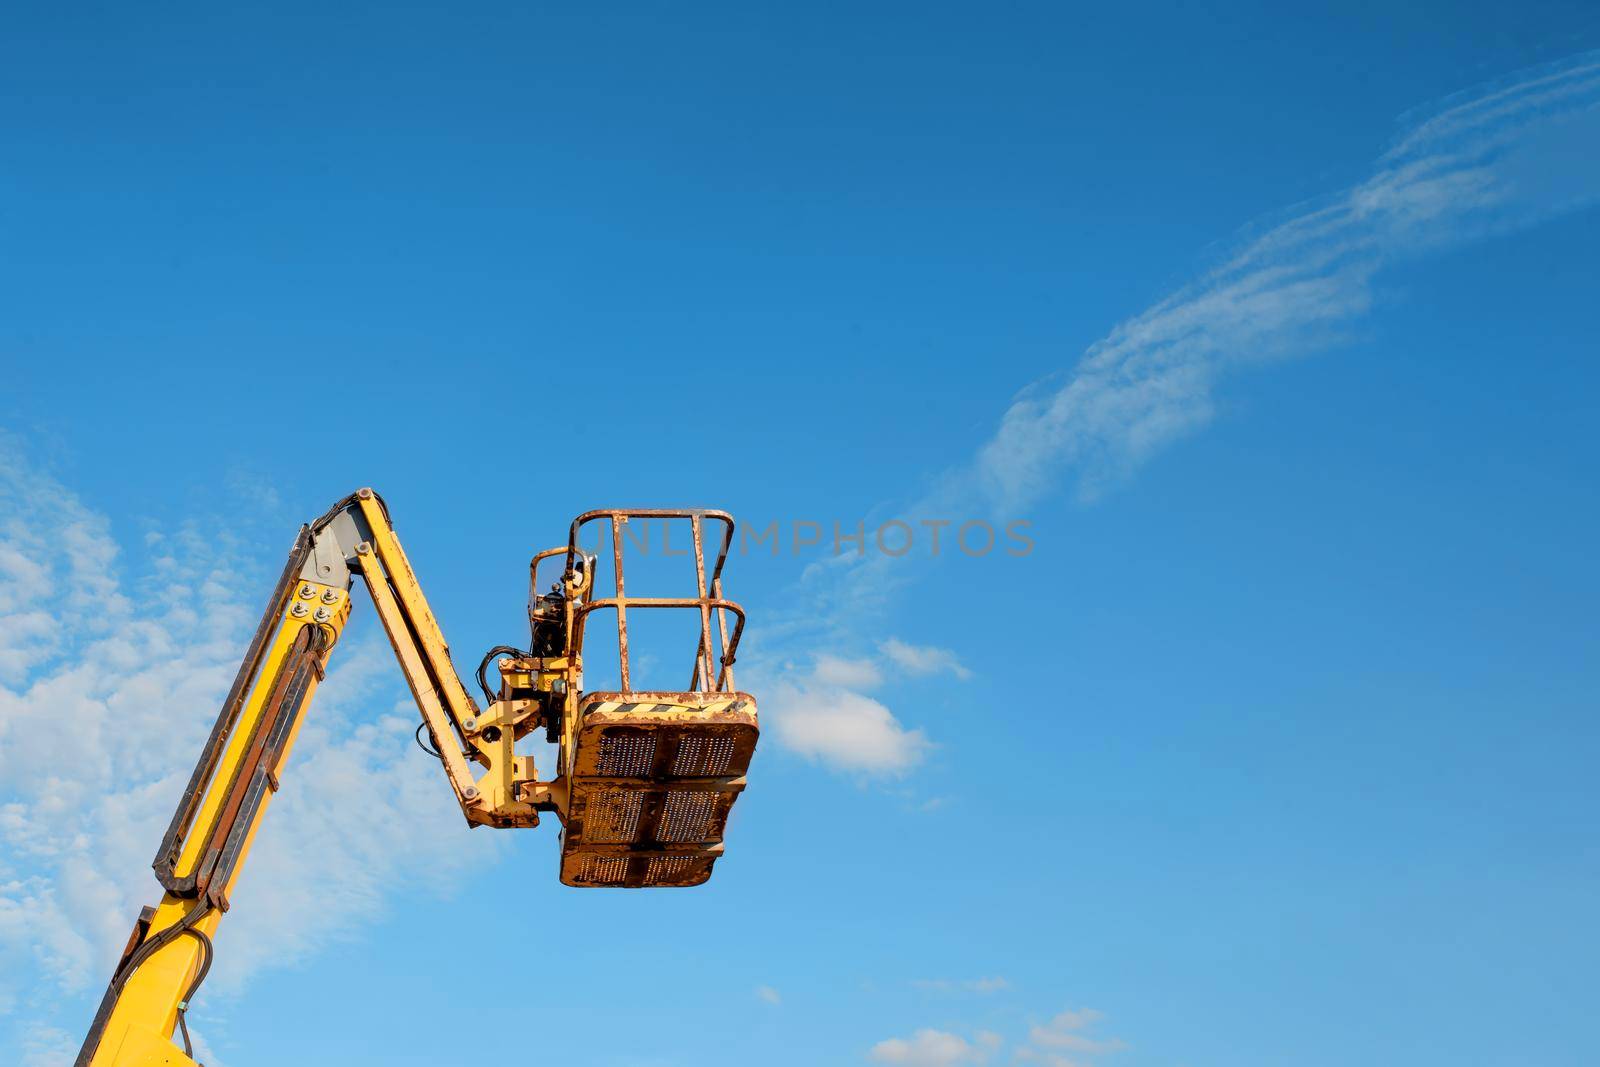 Telescopic boom lift rised up on blue sky background delivered to constraction site ready to be used by steel frame erectors, roofers and painters by Iryna_Melnyk